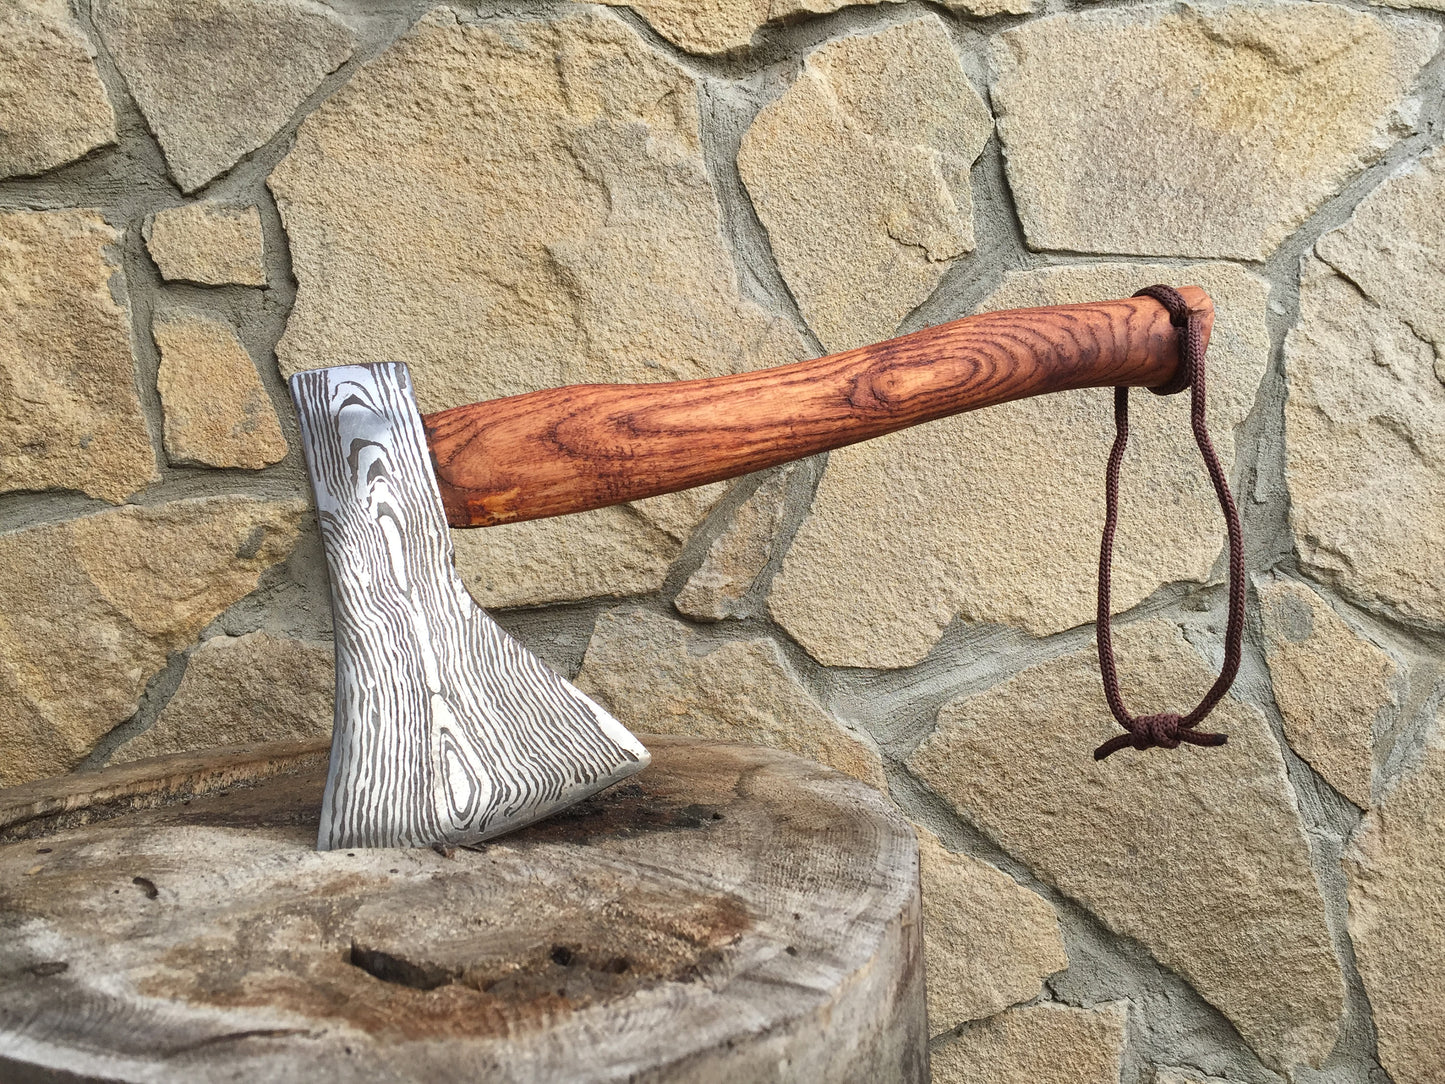 Personalized axe, custom axe, axe gift, viking axe, traveling gifts, tomahawk, hatchet, mens gifts, hunting, camping, hiking, iron gift,axes